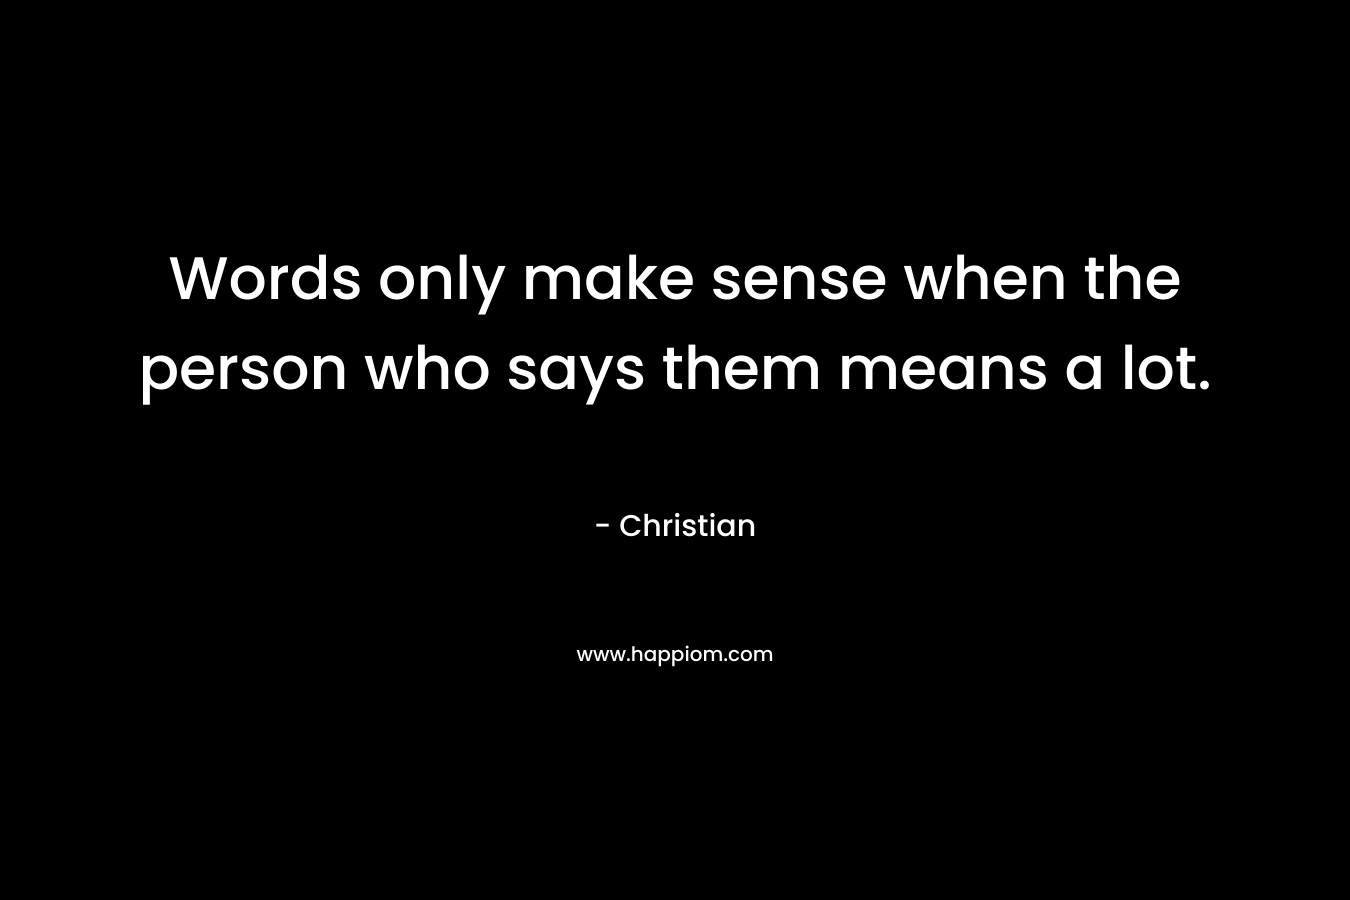 Words only make sense when the person who says them means a lot.